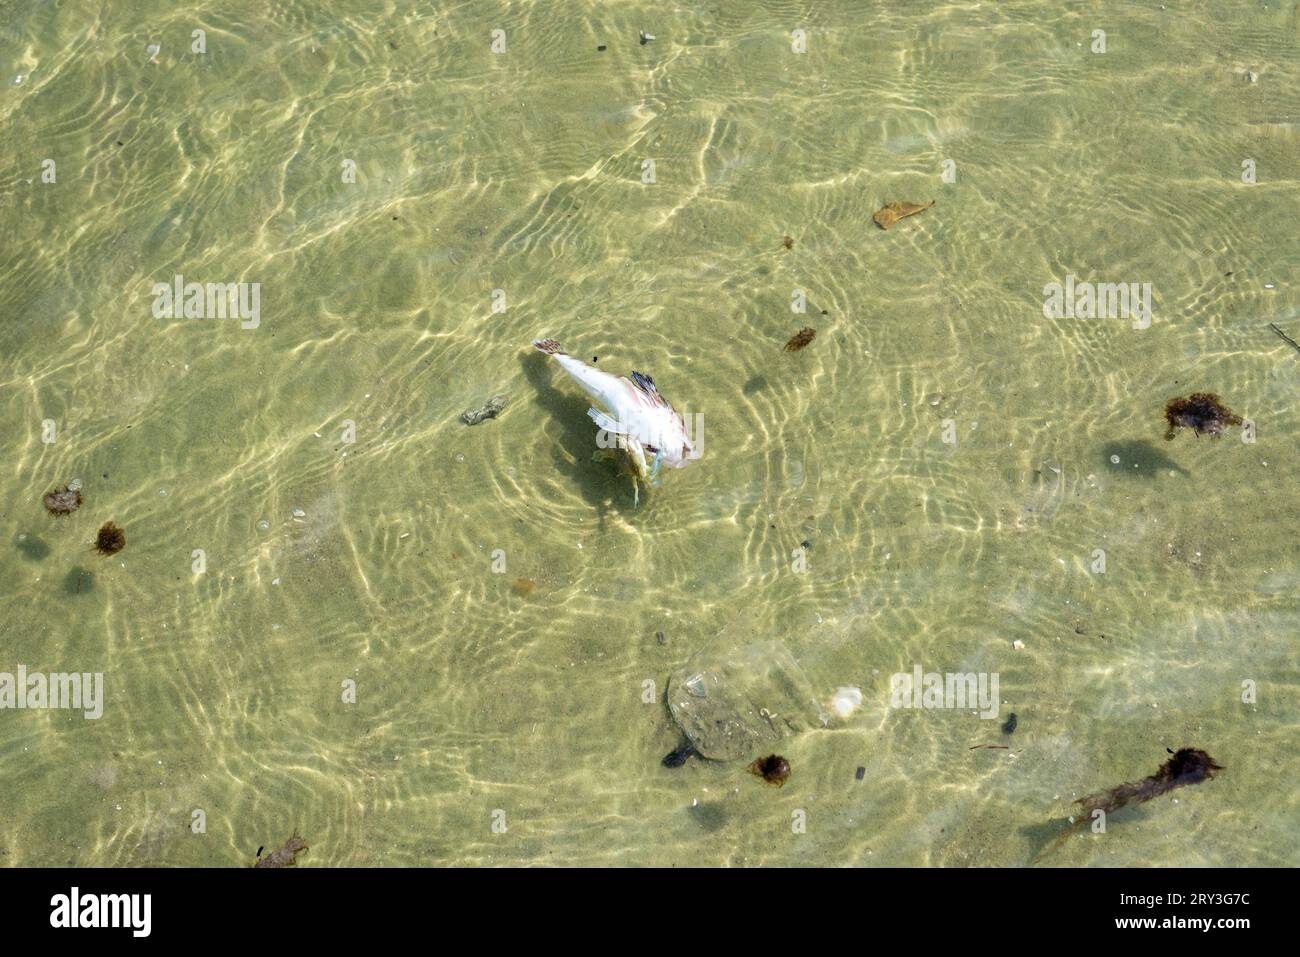 A dead fish floating in the yellow water of a beach. Problems in the environment. Santo Amaro, Bahia. Stock Photo